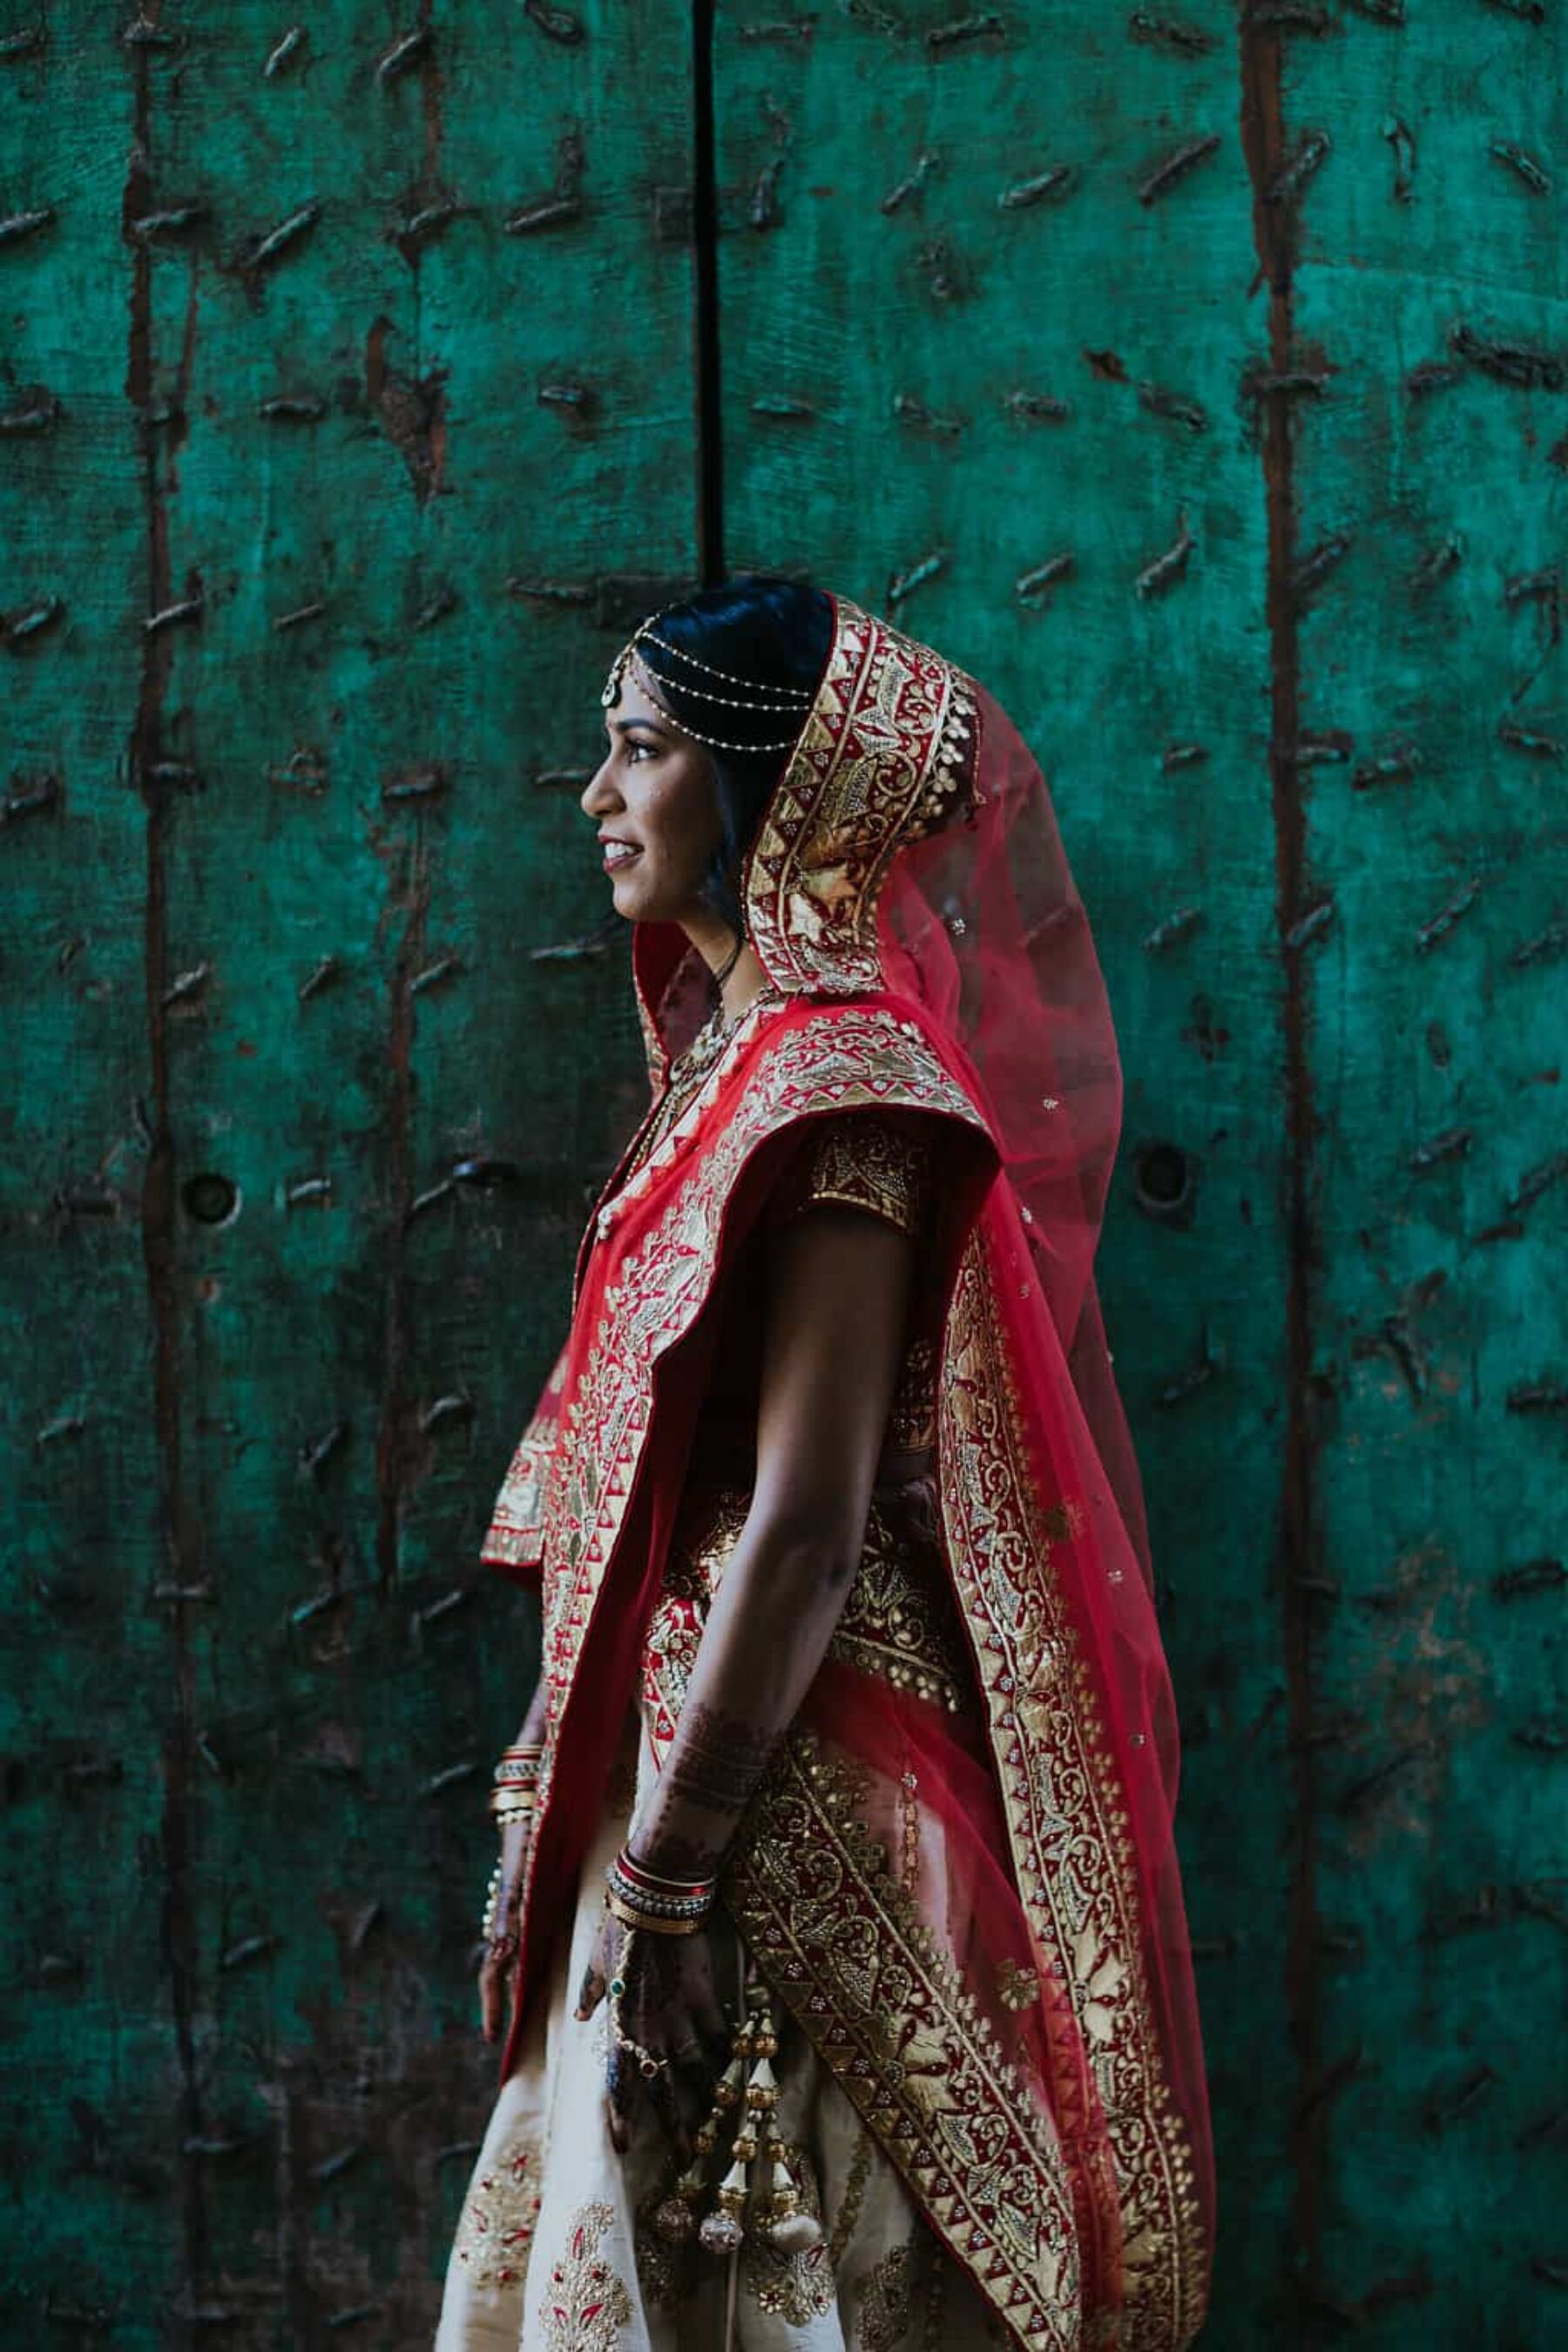 stunning Hindu bride in vibrant red and gold wedding attire